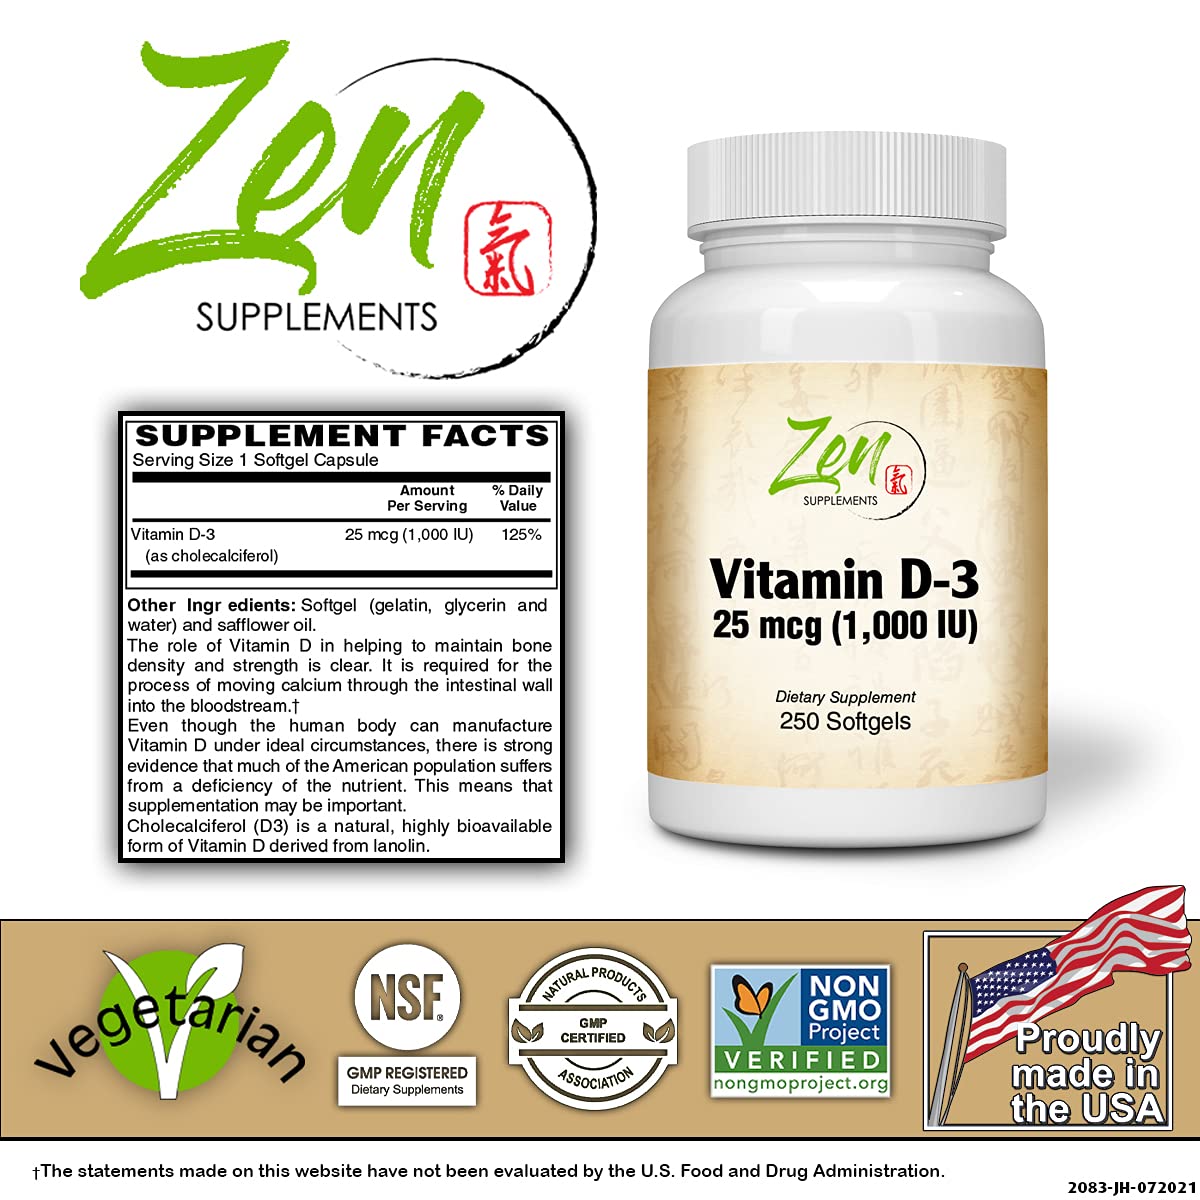 Zen Supplements - Vitamin D-3 1,000 IU 250-Softgel - Supports Healthy Muscle Function, Bone Health & Immune Support